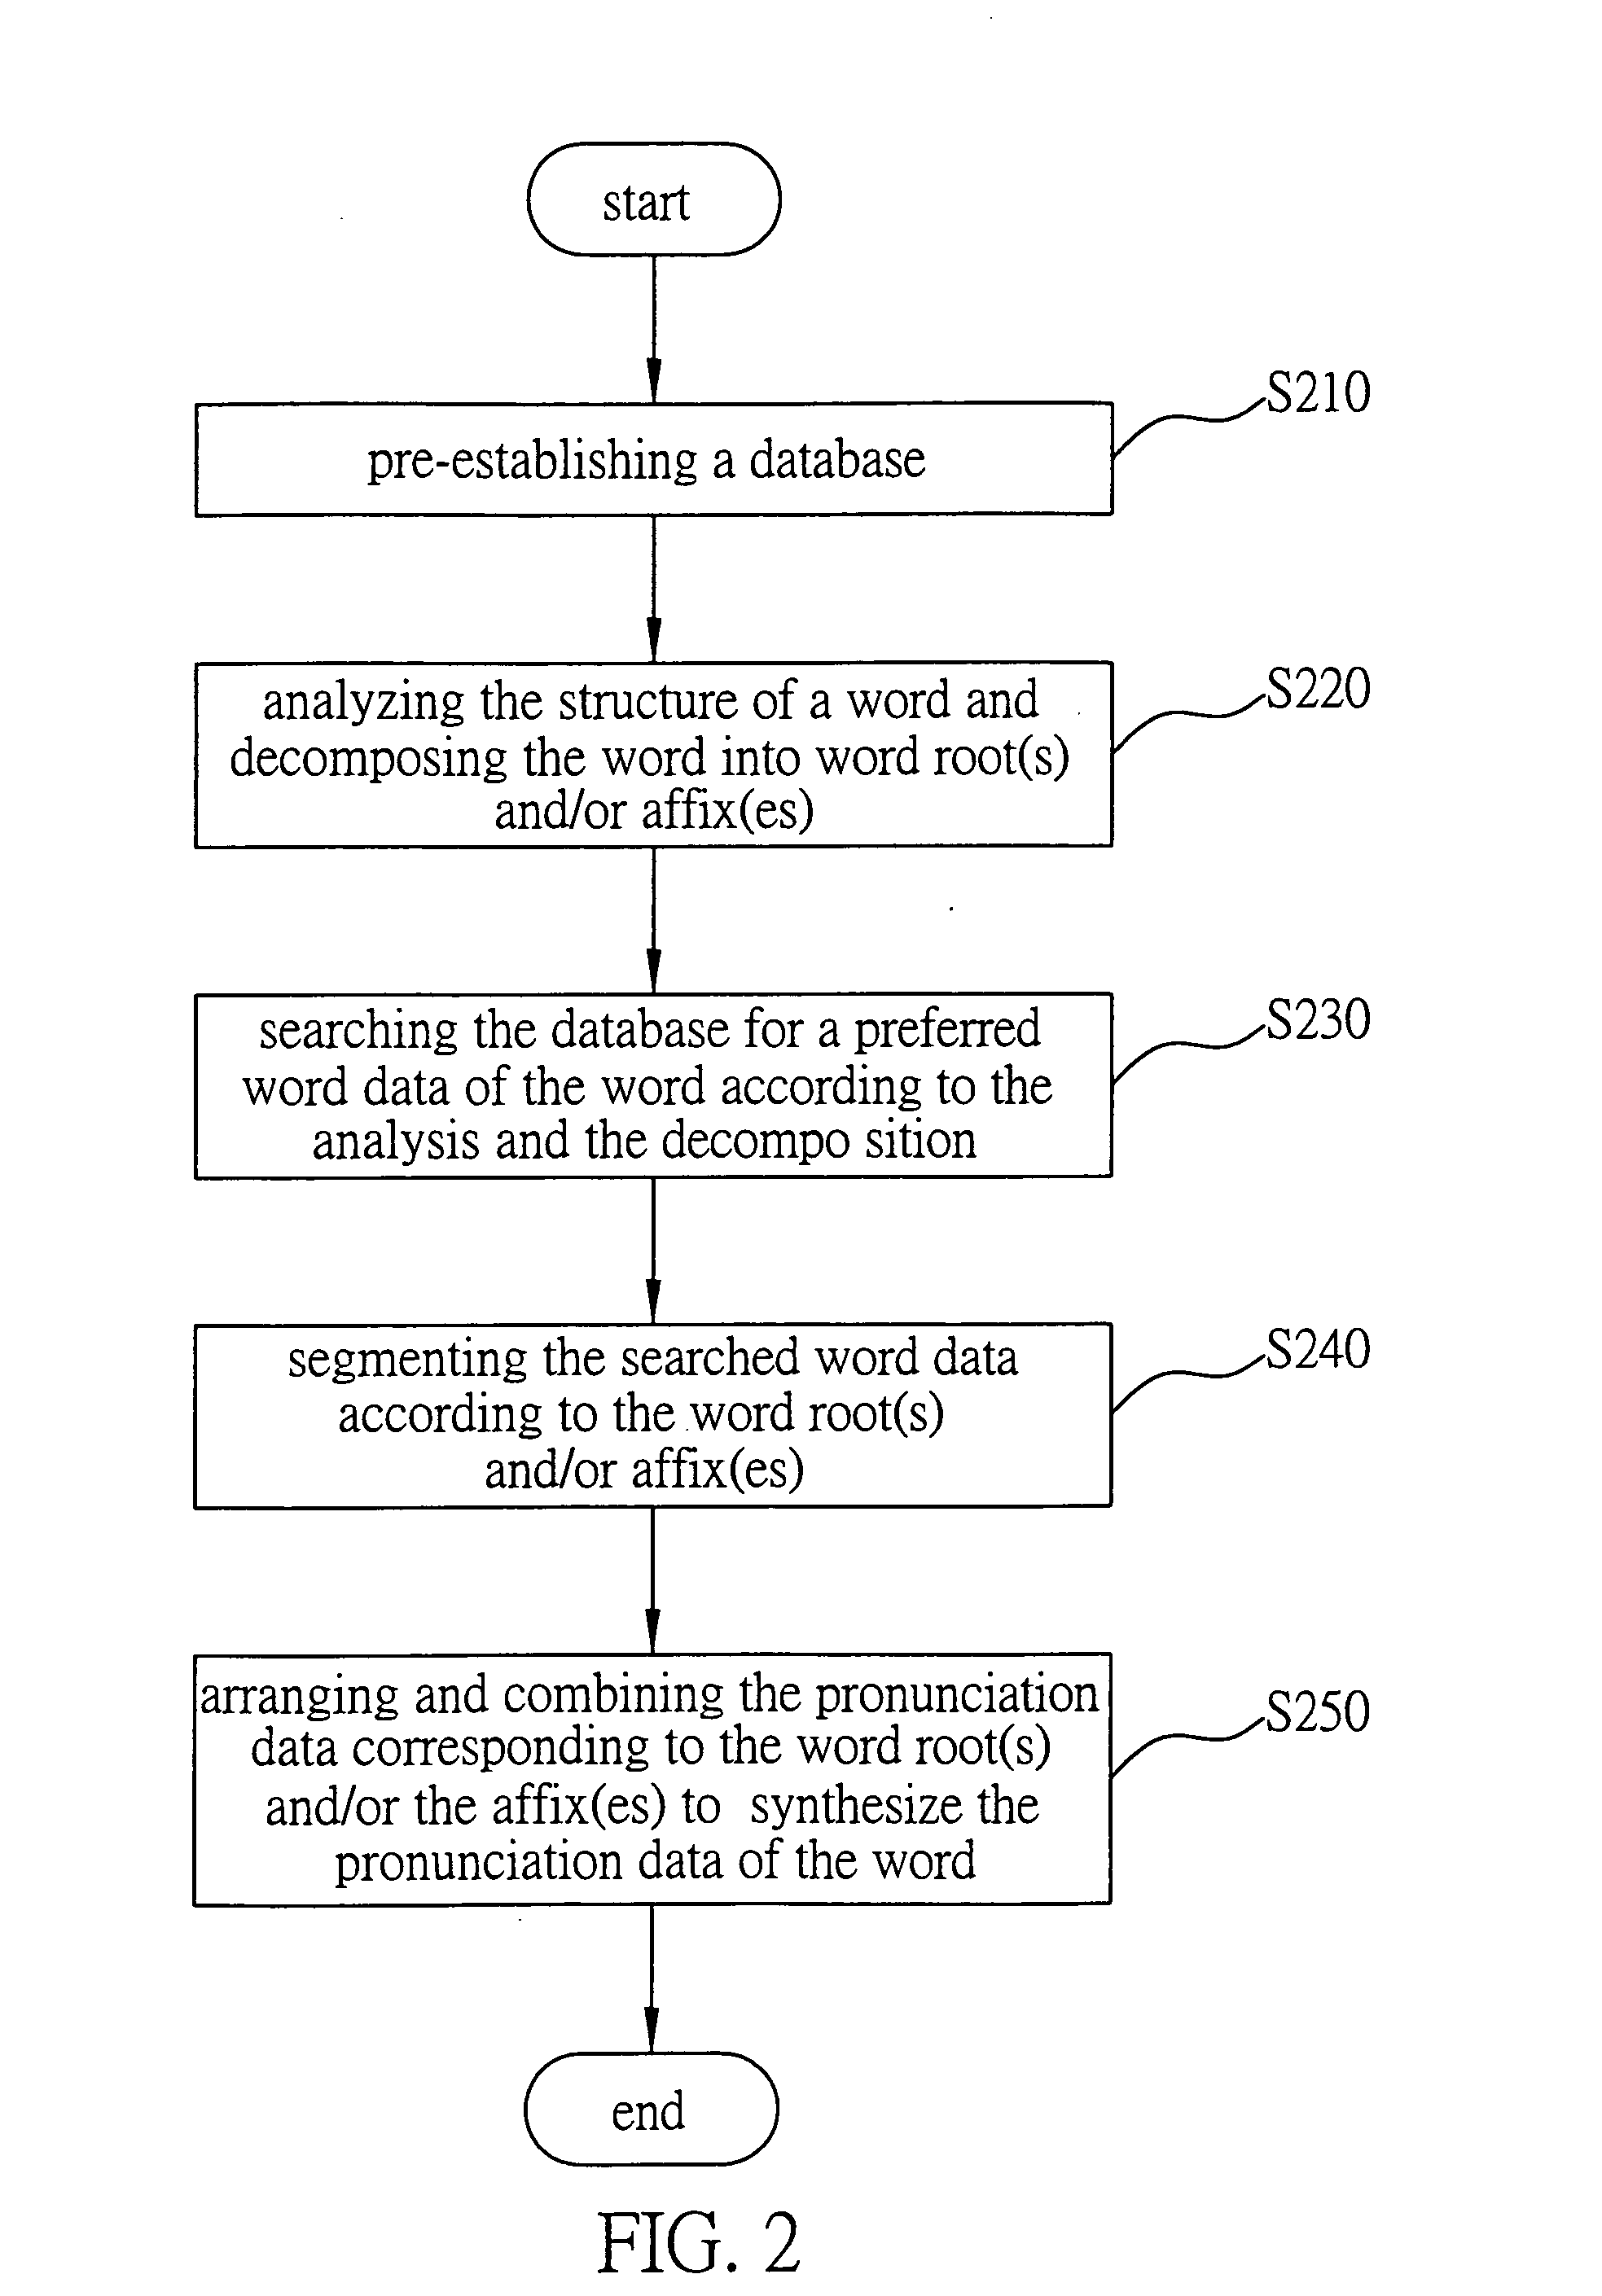 Pronunciation synthesis system and method of the same